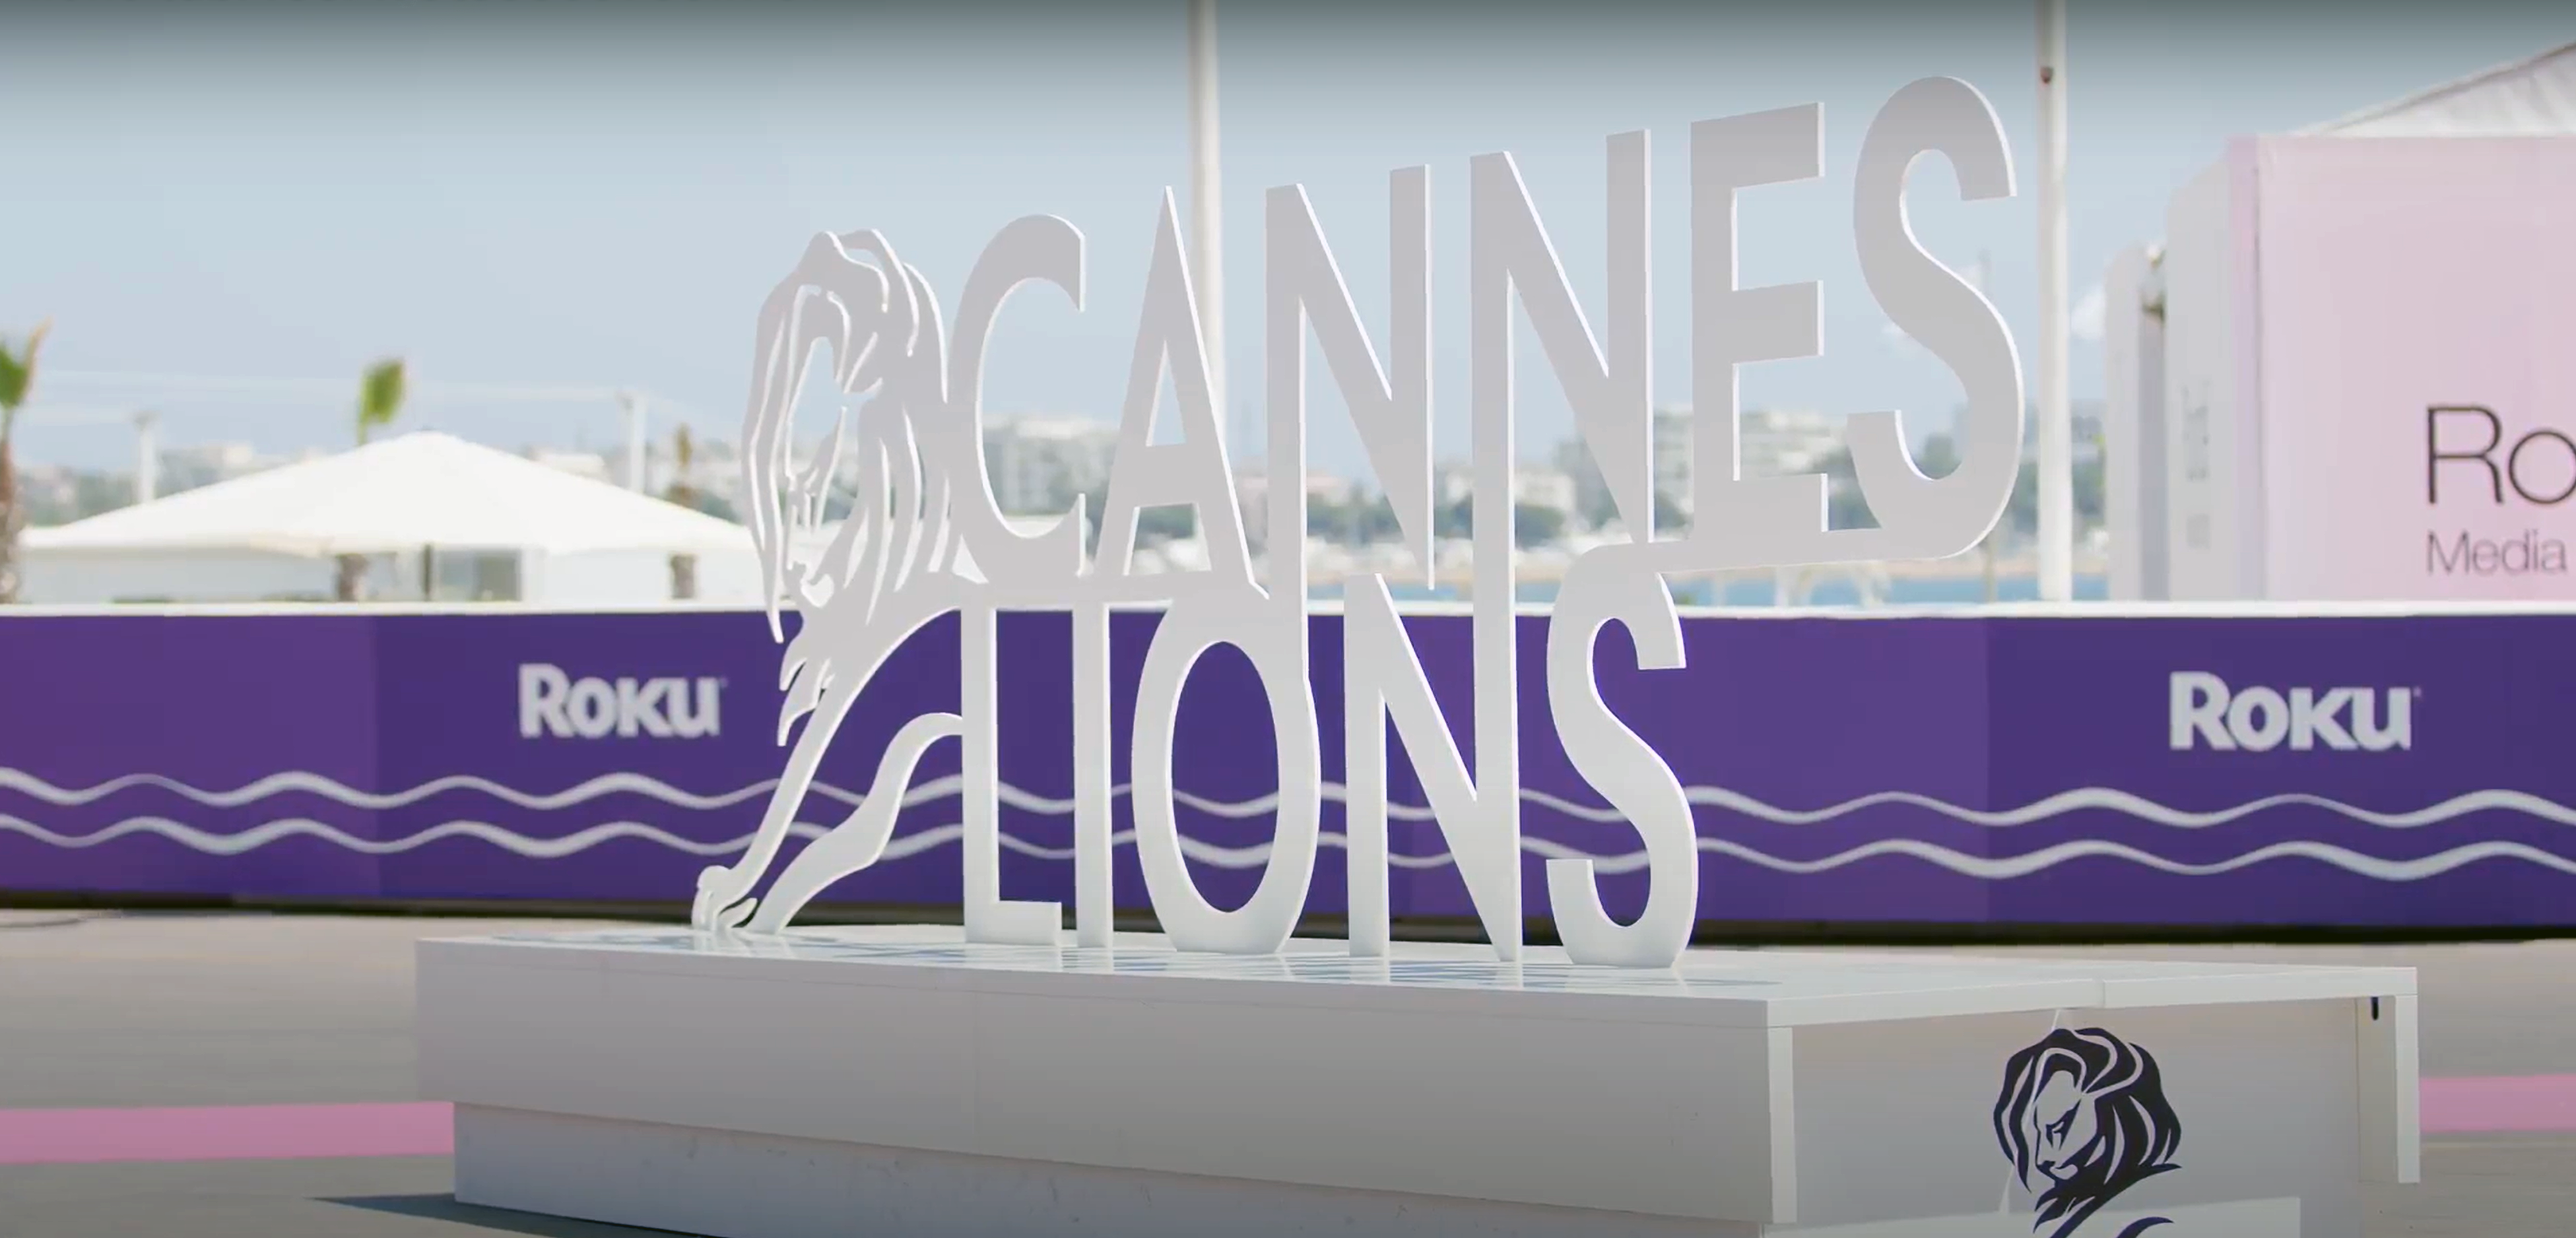 Tubi Marquee Cannes Lions